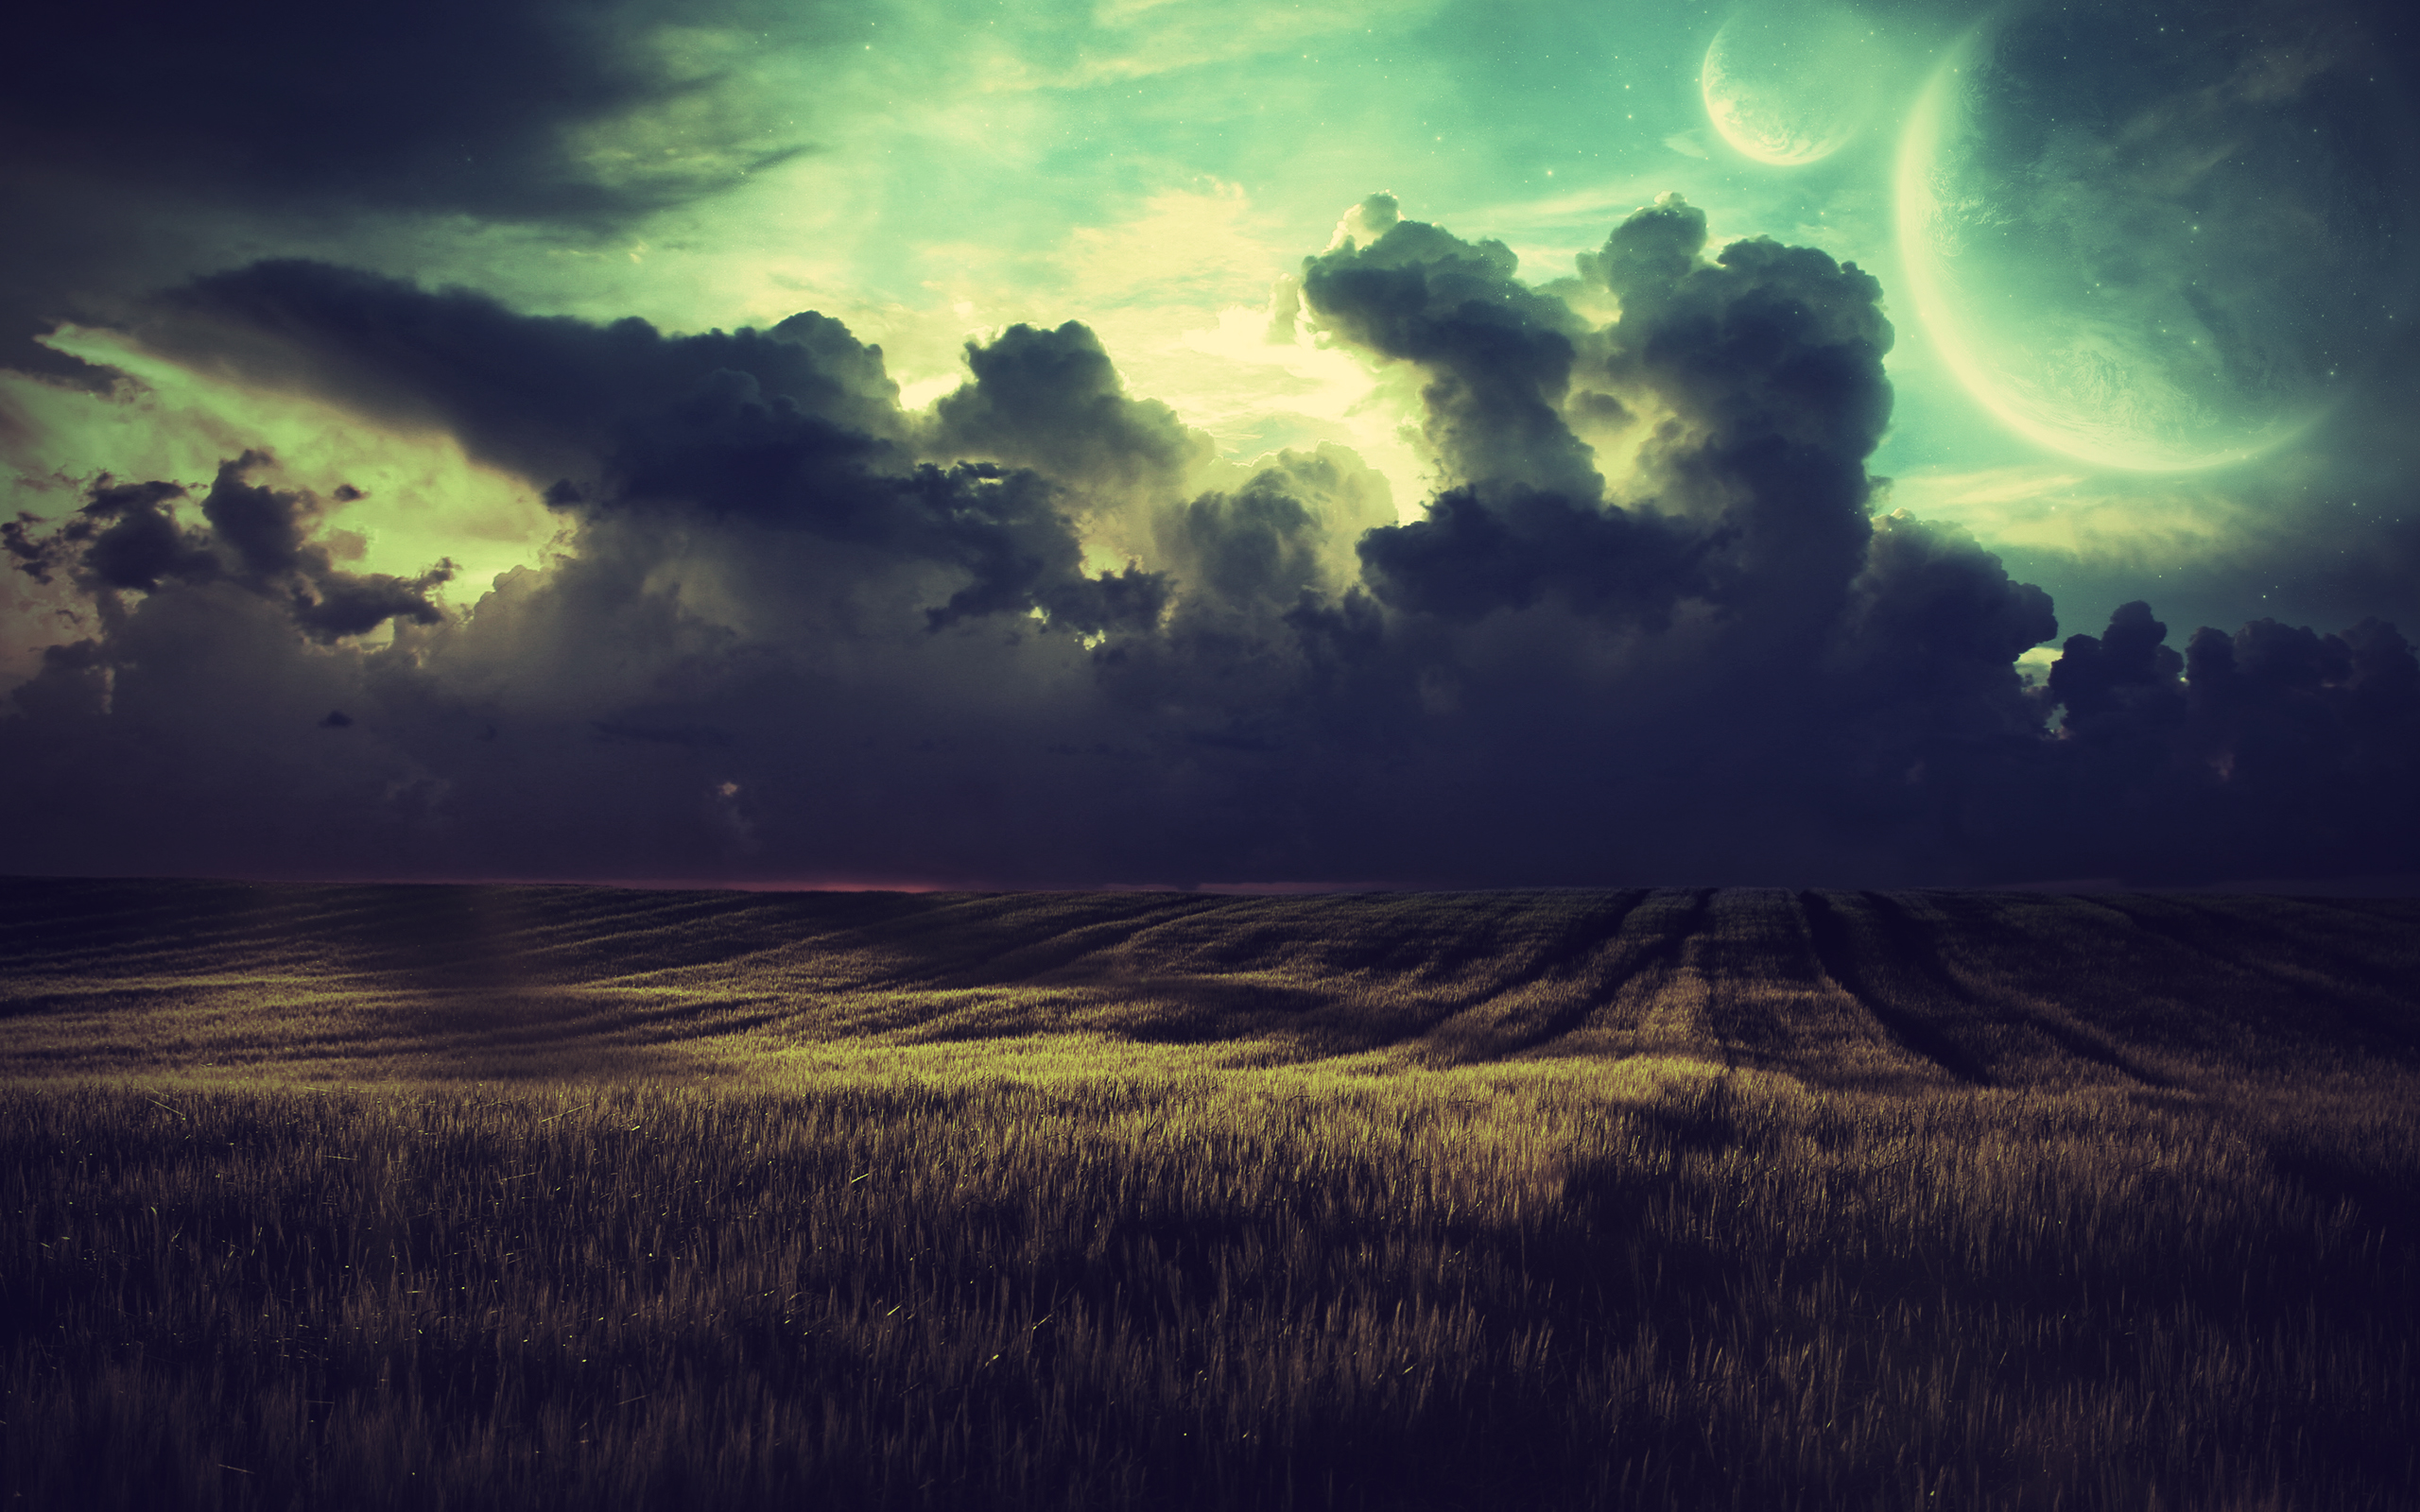 Fantasy sci-fi landscape with clouds on the horizon.